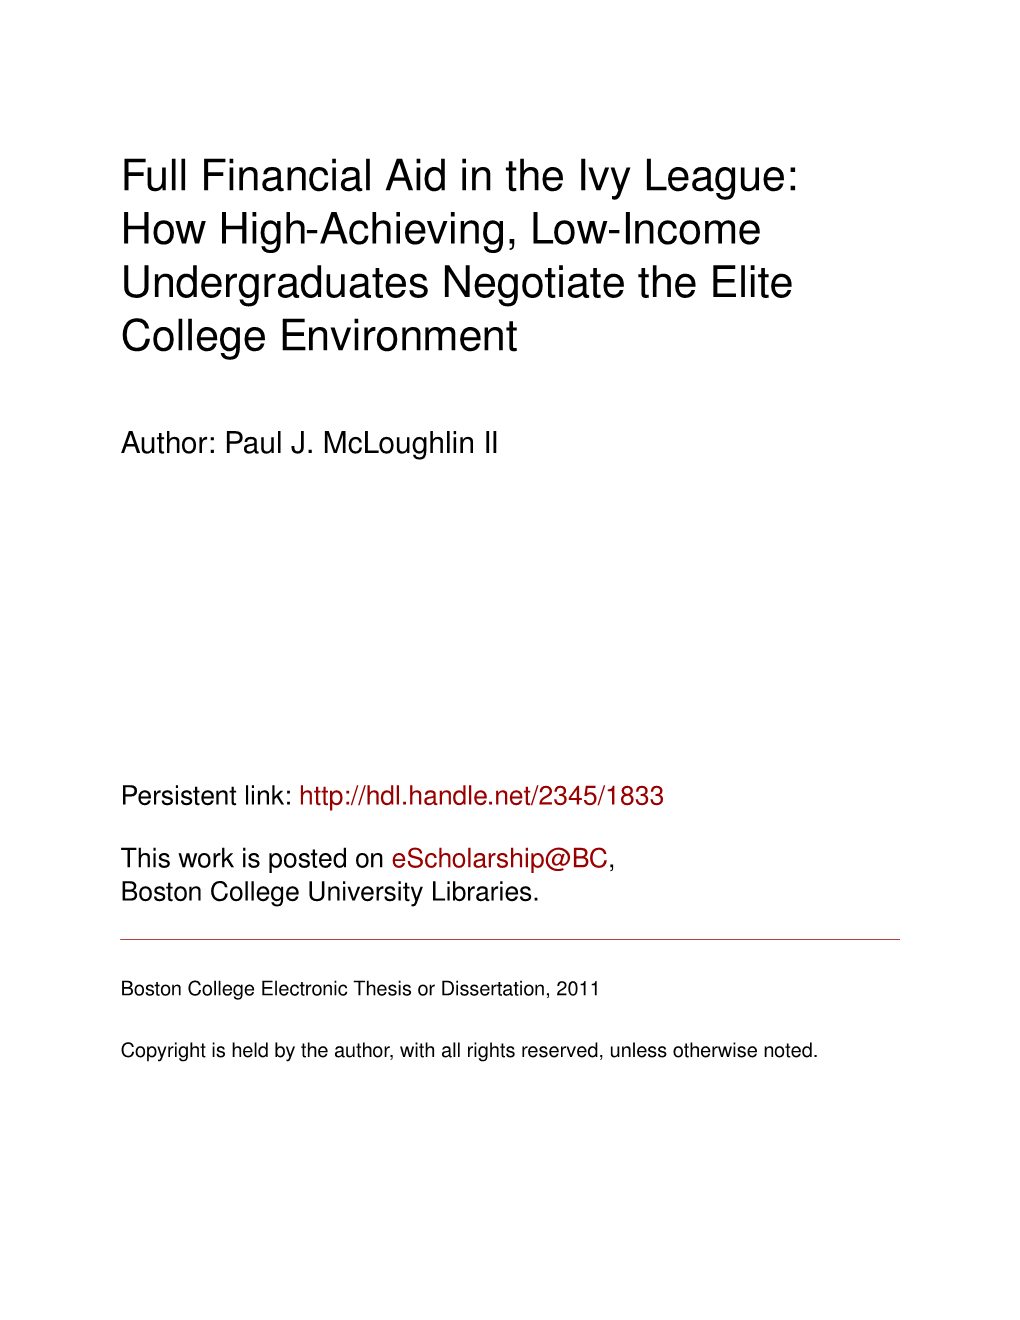 Full Financial Aid in the Ivy League: How High-Achieving, Low-Income Undergraduates Negotiate the Elite College Environment